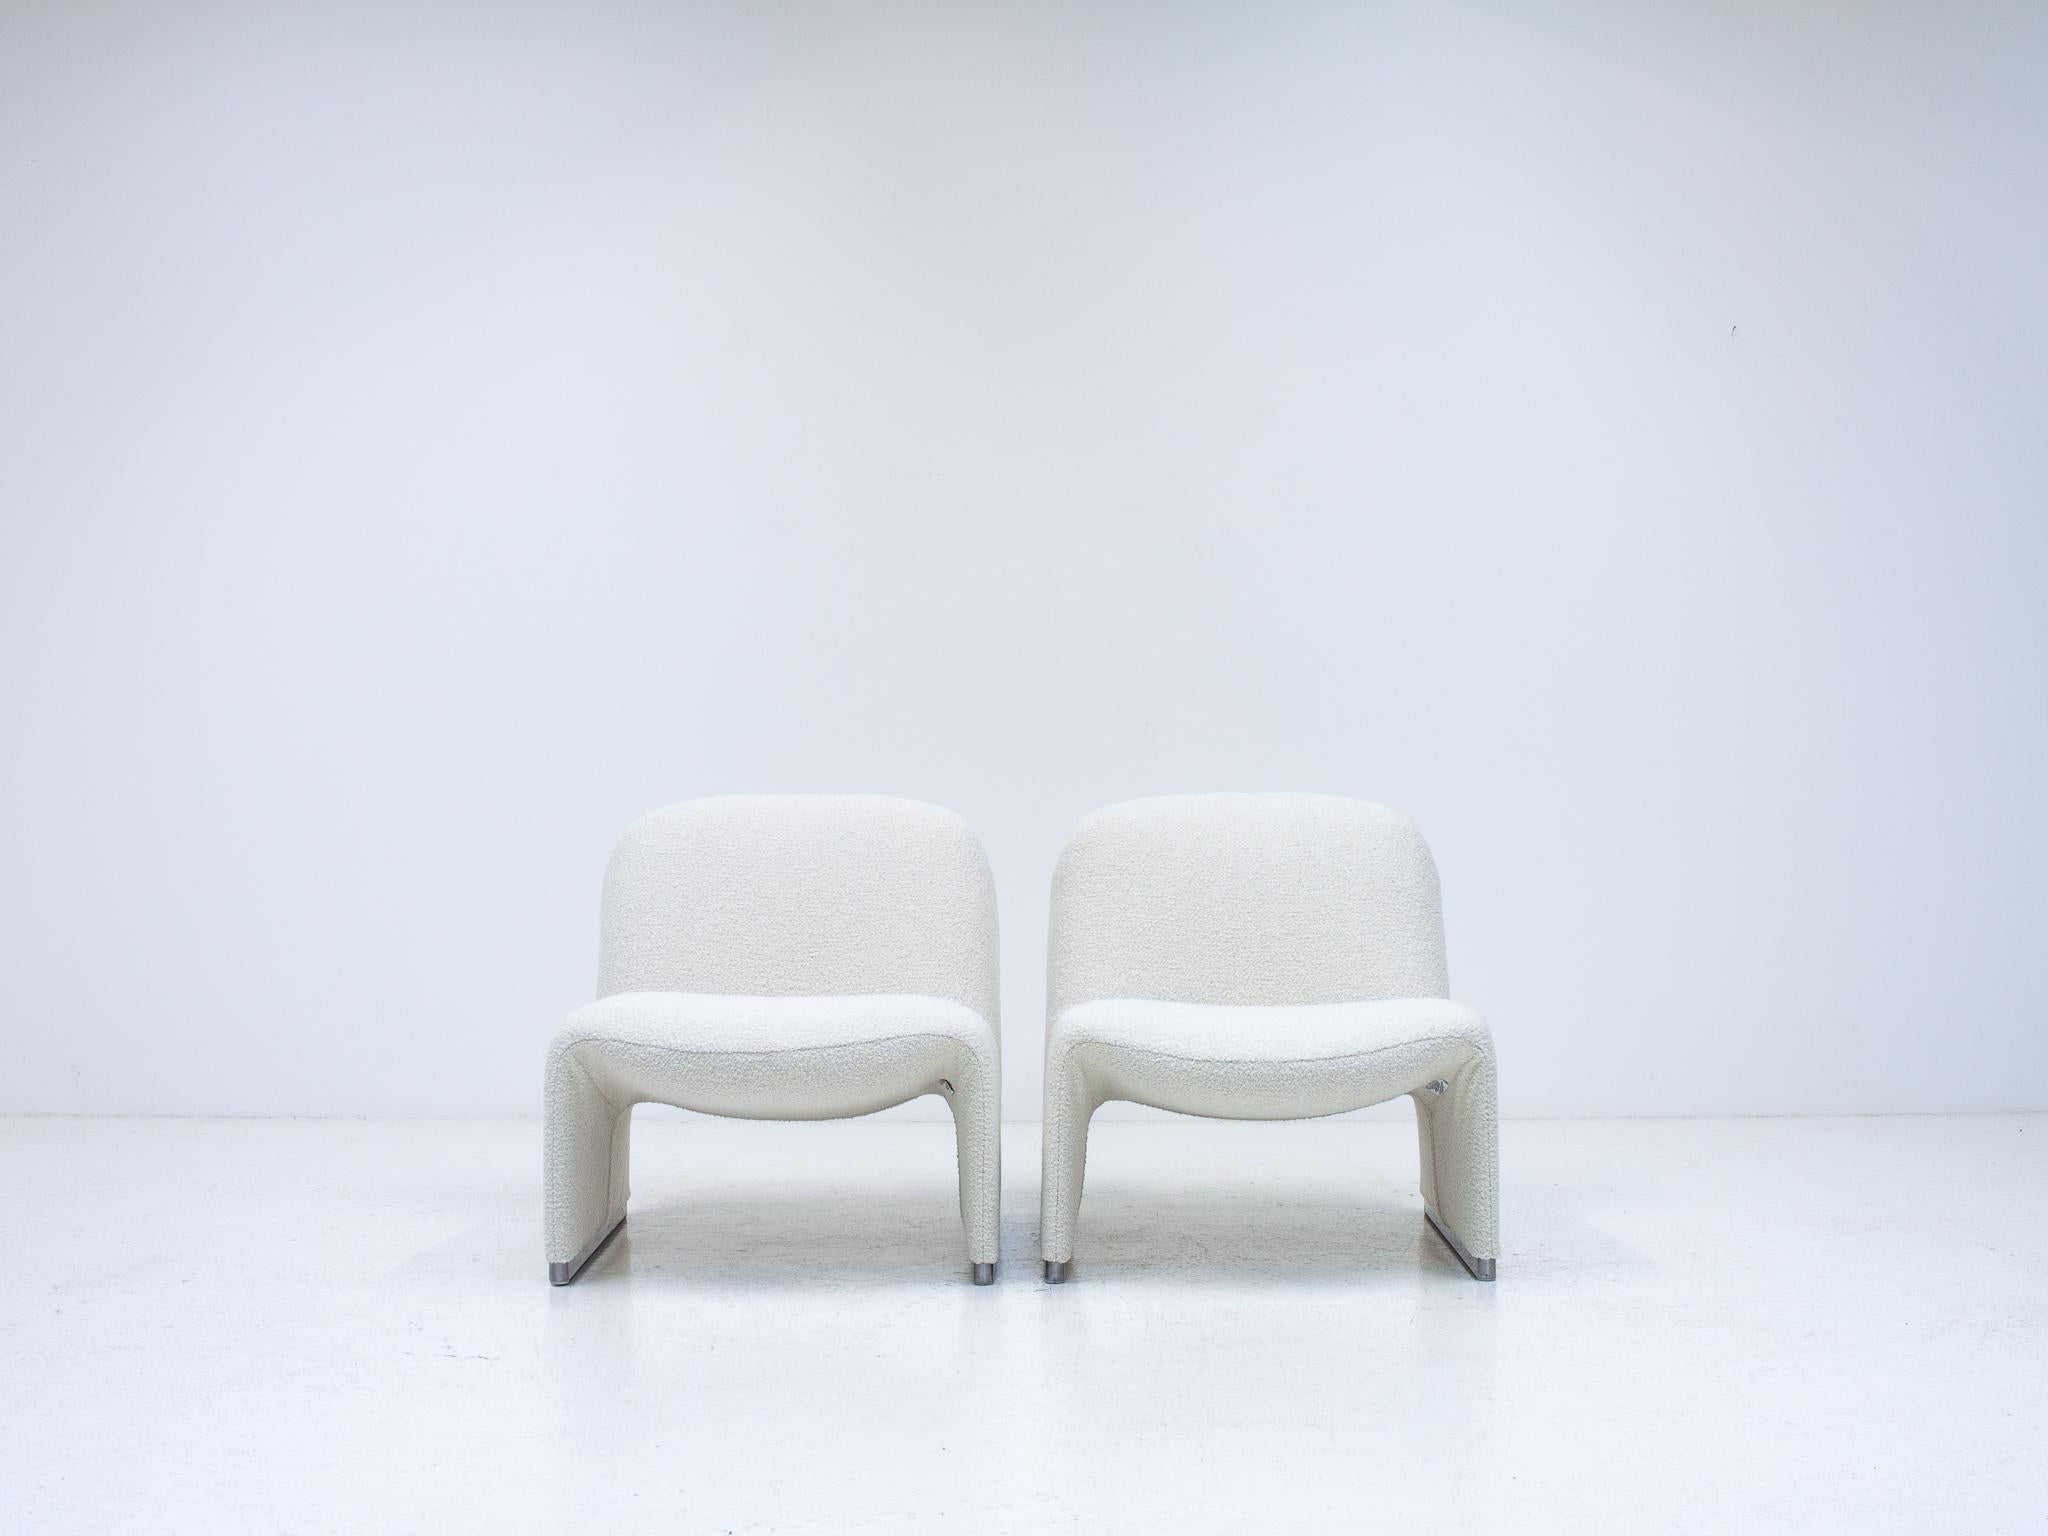 Giancarlo Piretti “Alky” Chairs In Yarn Collective bouclé *Customizable* For Sale 10